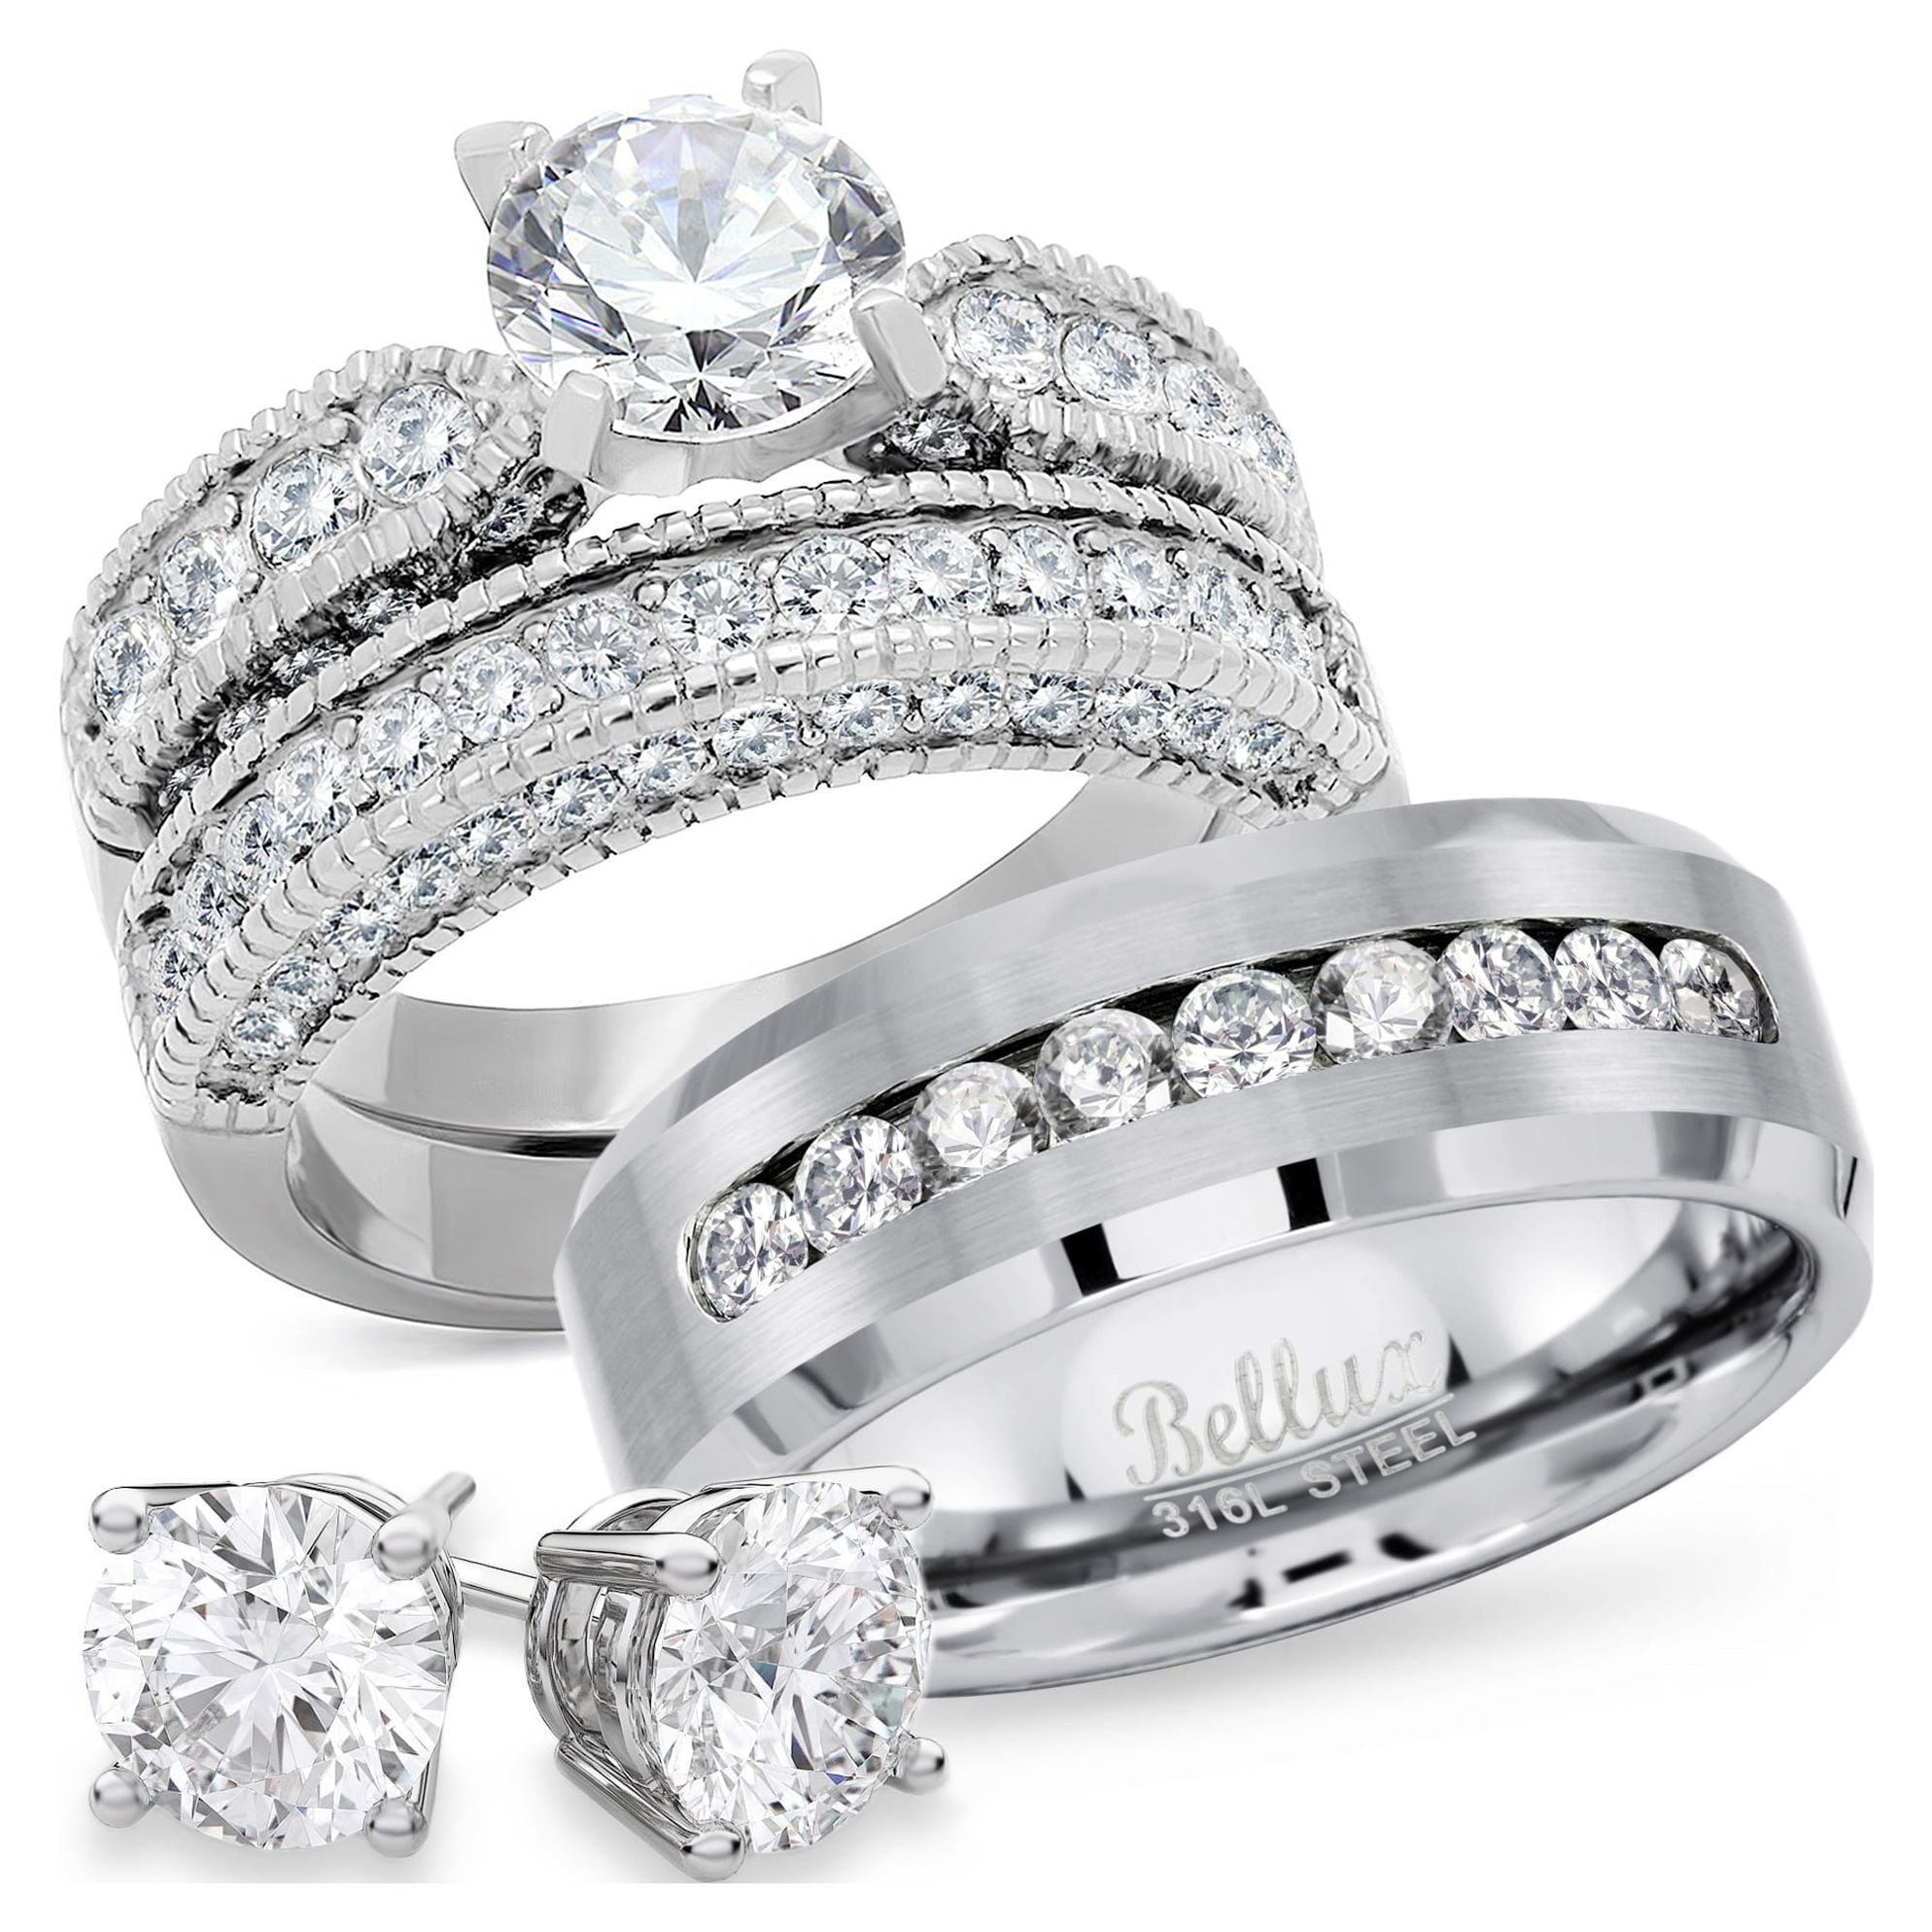  Women's Bridal Rings Sets - $50 To $100 / Women's Bridal Rings  Sets / Women's We: Clothing, Shoes & Jewelry